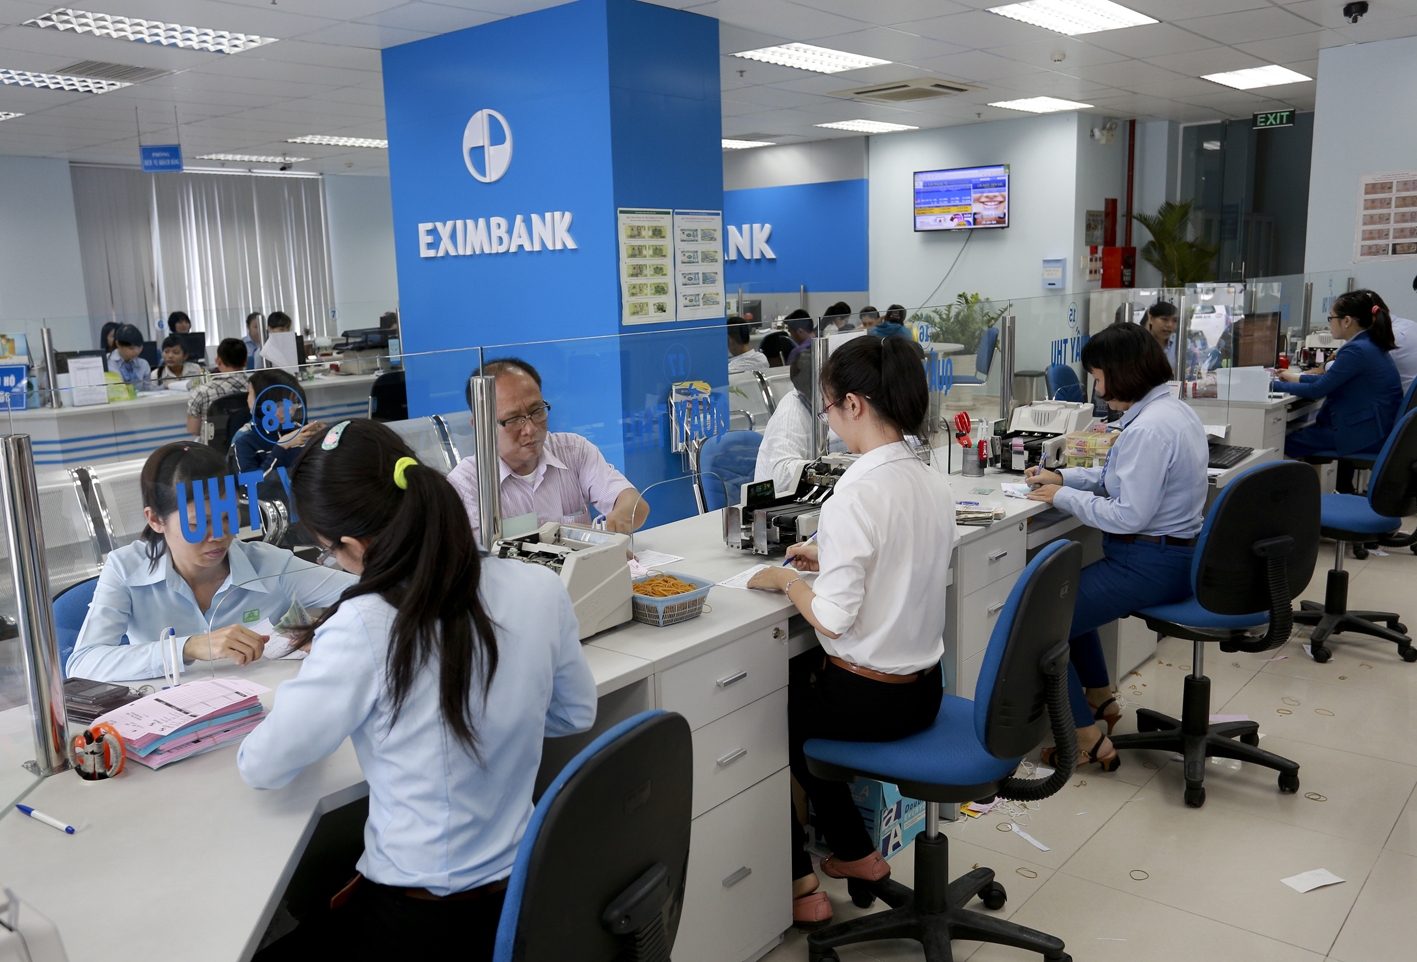 Eximbank’s S&P outlook revised to stable